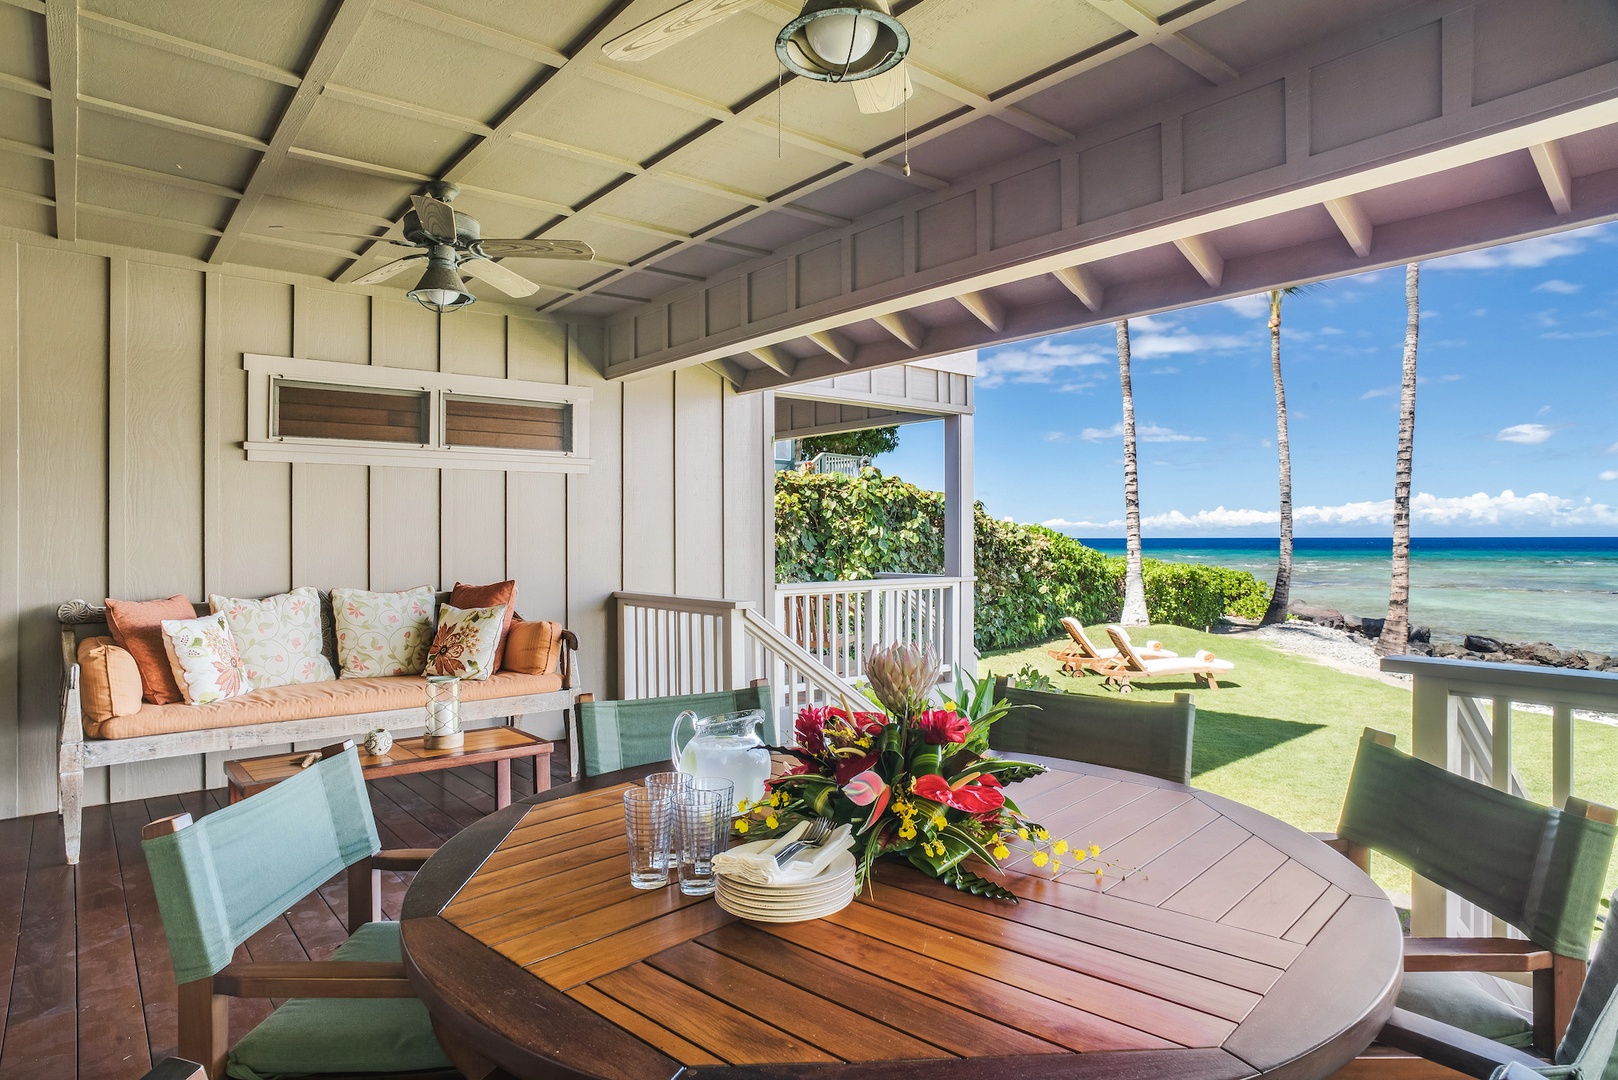 Kamuela Vacation Rentals, 3BD Estate Home at Puako Bay (10D) - Main Lanai Off Living Room, an Ideal Spot to Gather, Dine and Relax